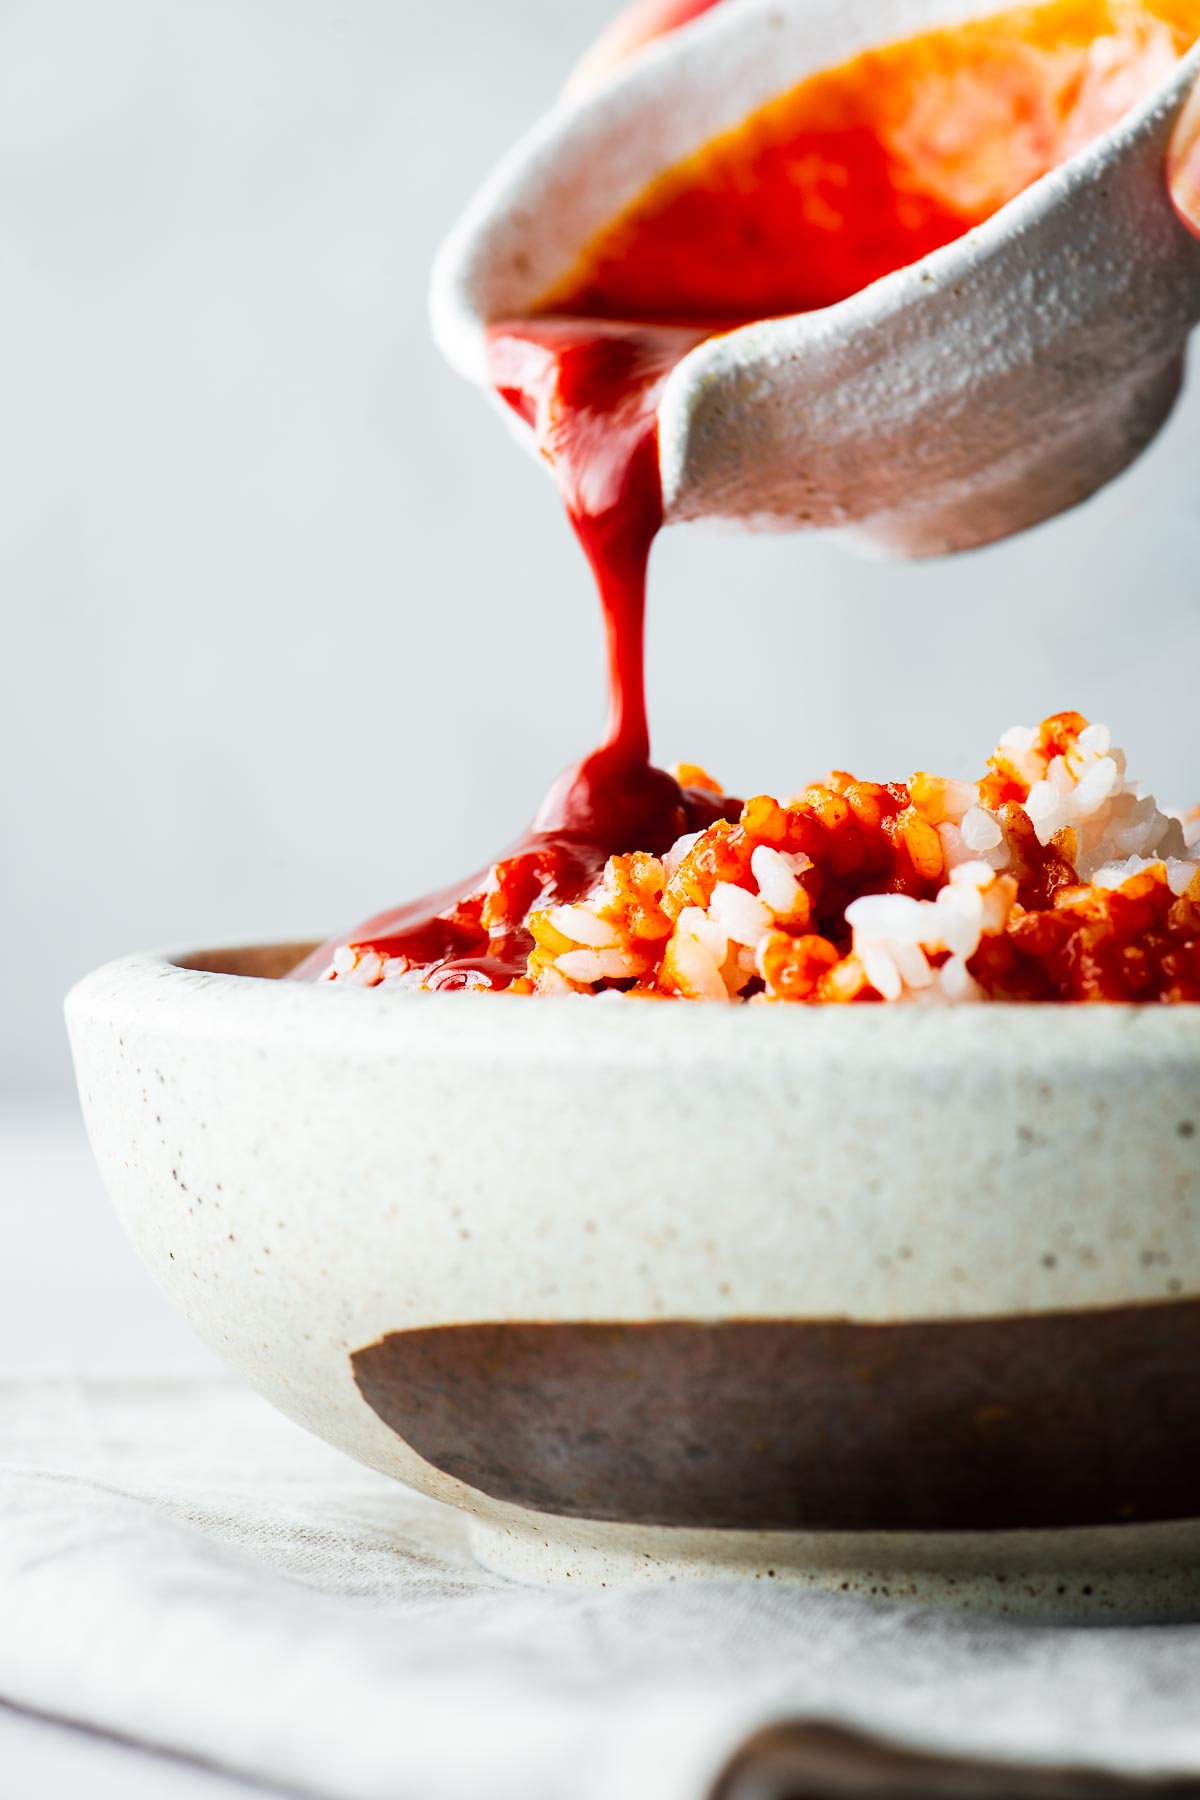 Pouring gochujang sauce from a white pourer onto a bowl of rice.